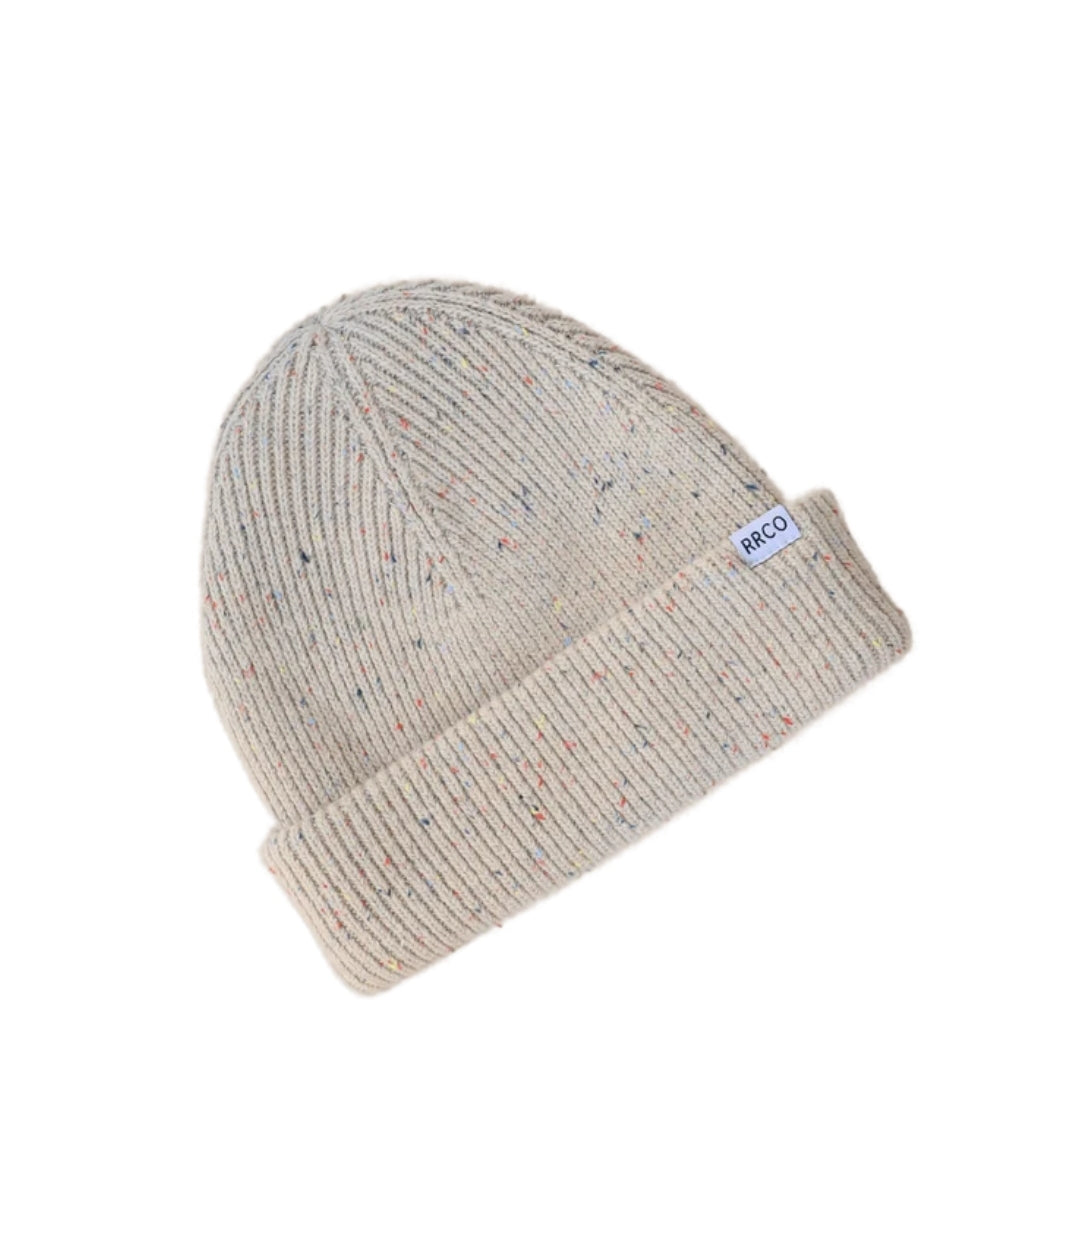 Thick Knit Beanie- Speckled